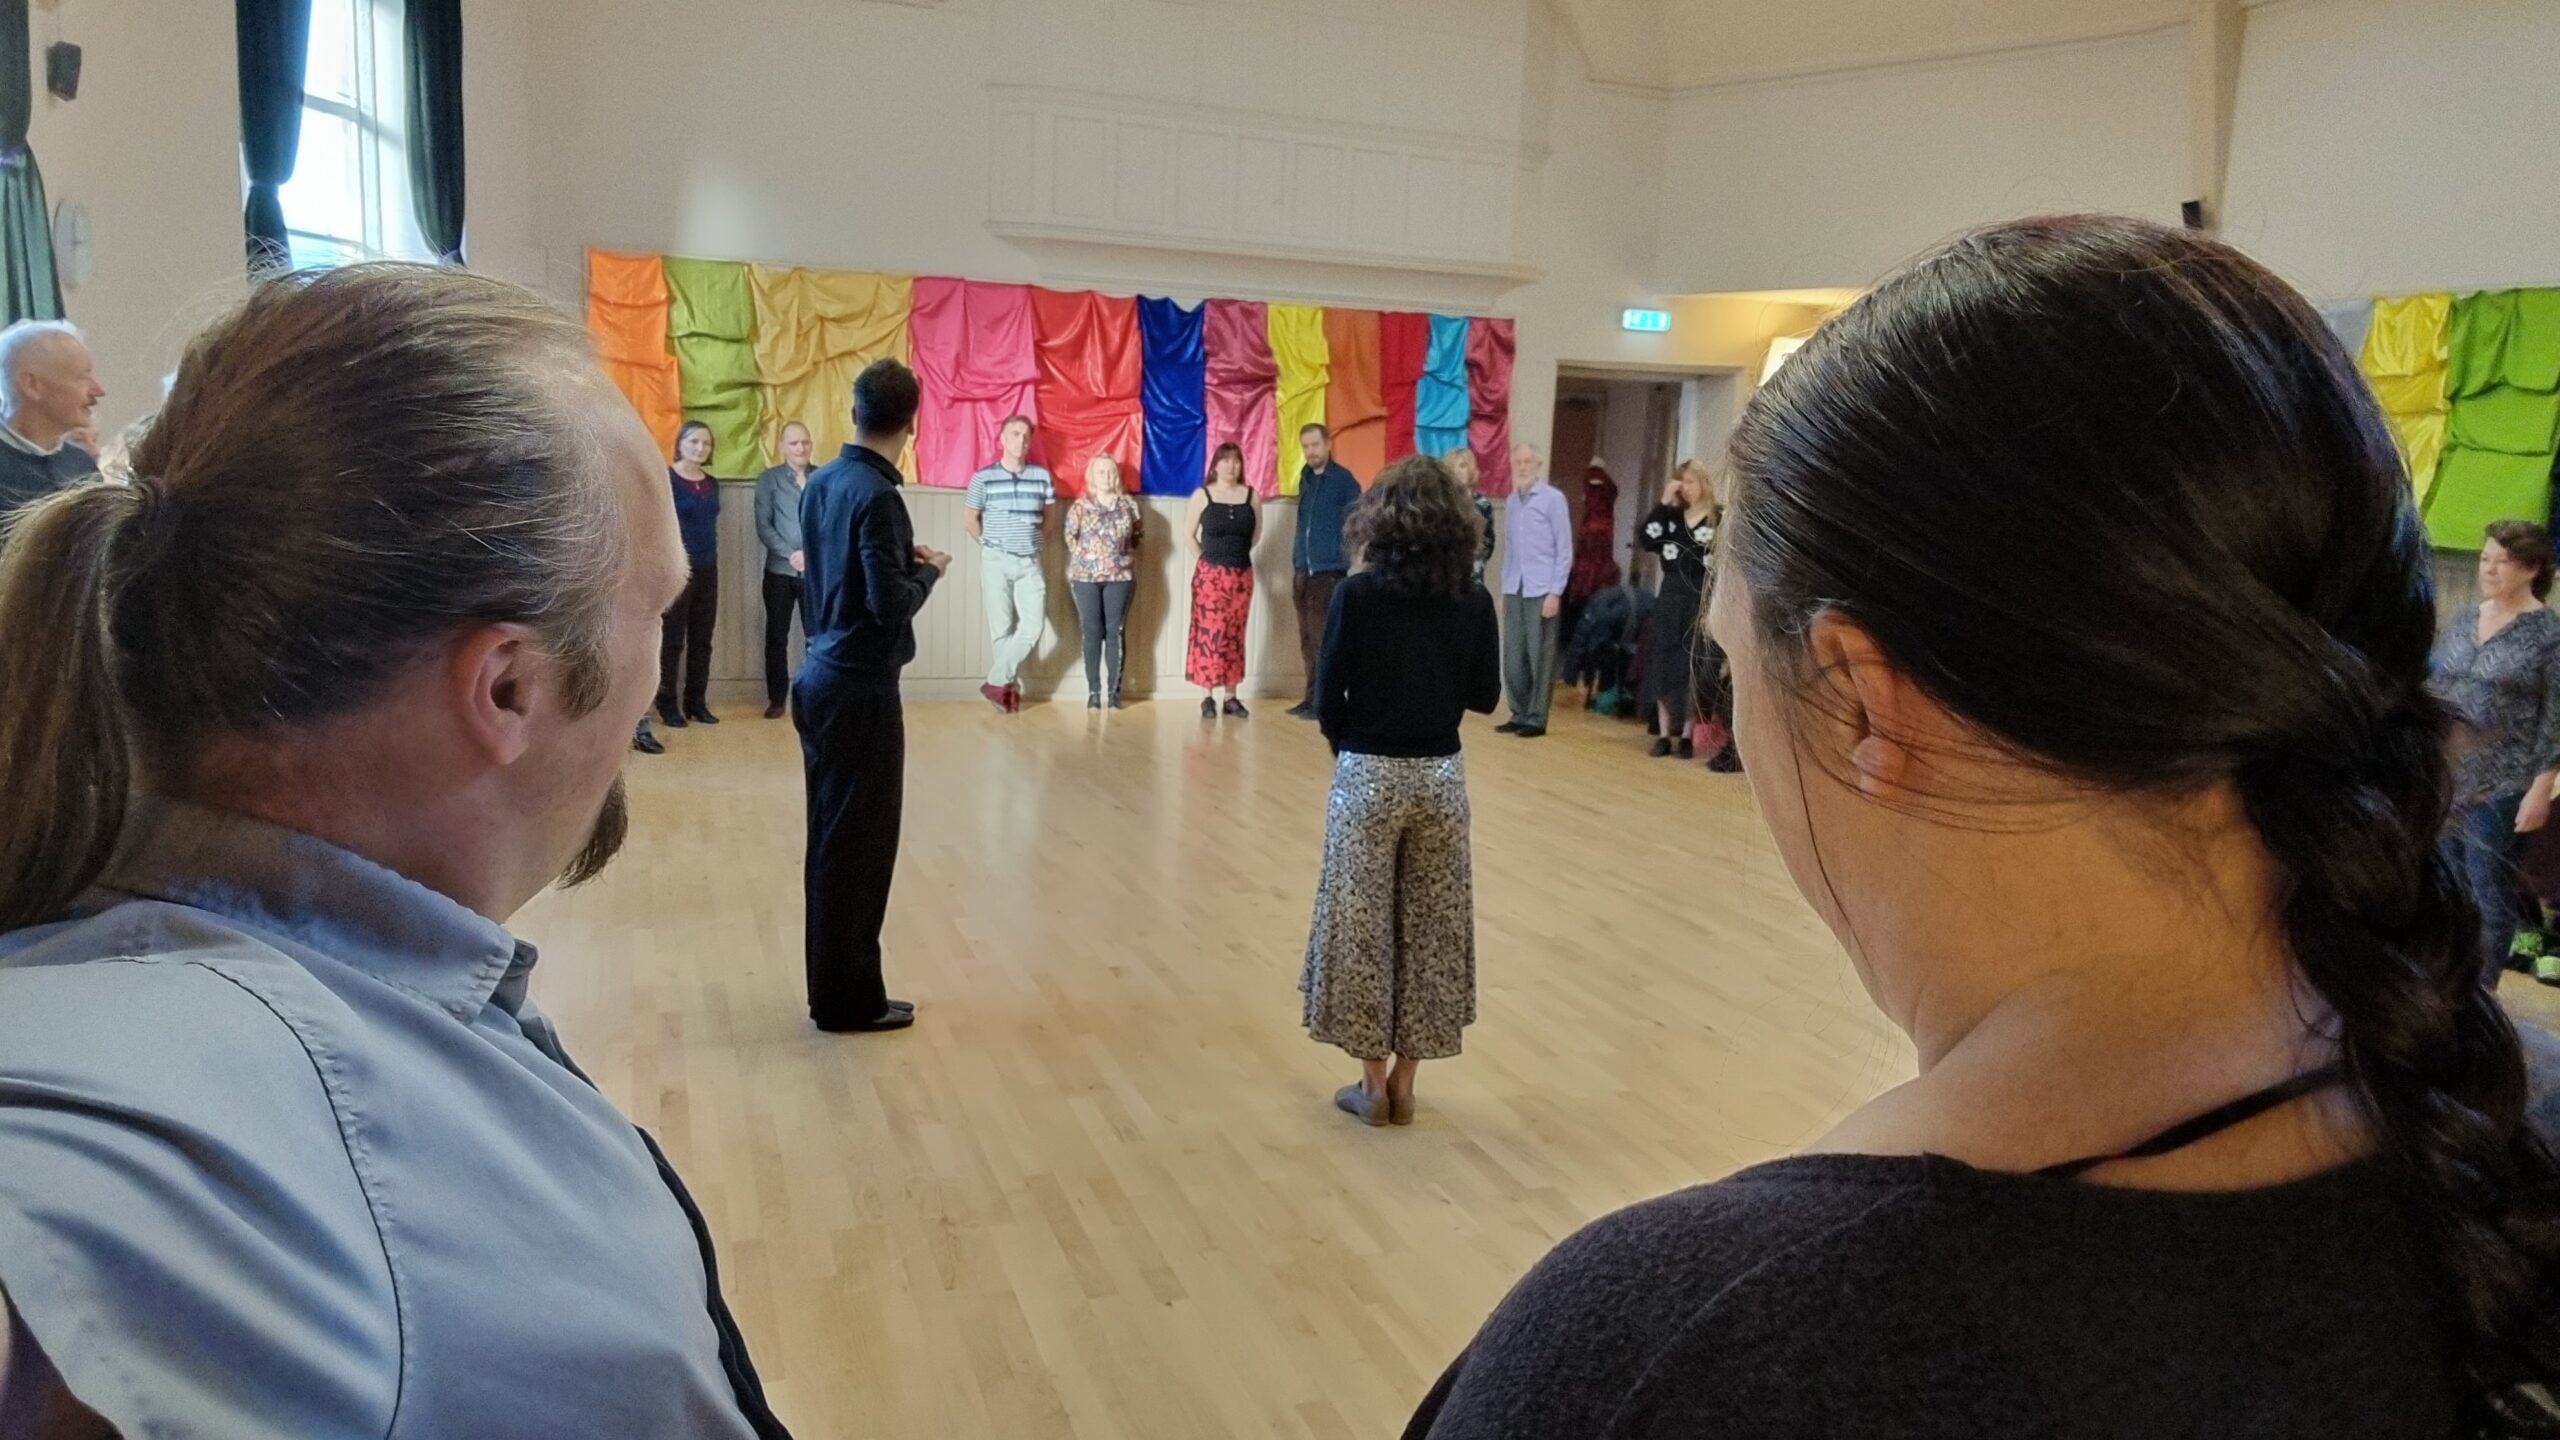 In a church hall, its walls decorated with colourful cloths, Dan and Ruth stand in a large circle of people, watching a man and a woman preparing to demonstrate some tango steps.